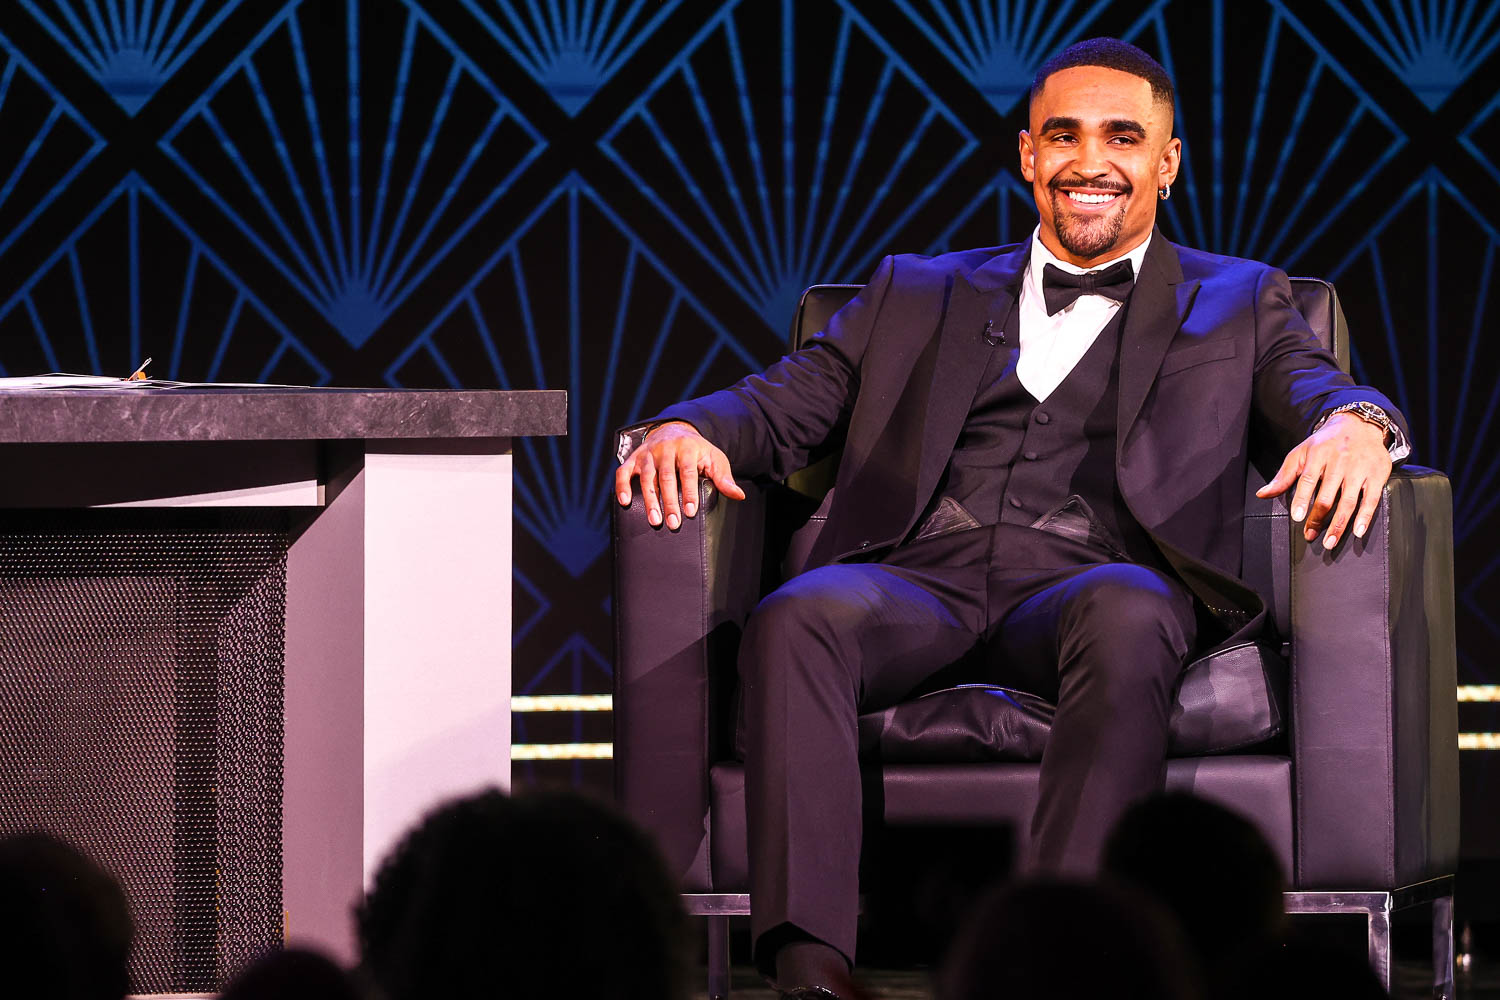 NFC Offensive Player of the Year award recipient Philadelphia Eagles quarterback Jalen Hurts during the 53rd annual 101 Awards at The Westin Crown Center in Kansas City, Missouri on Saturday, February 25, 2023.